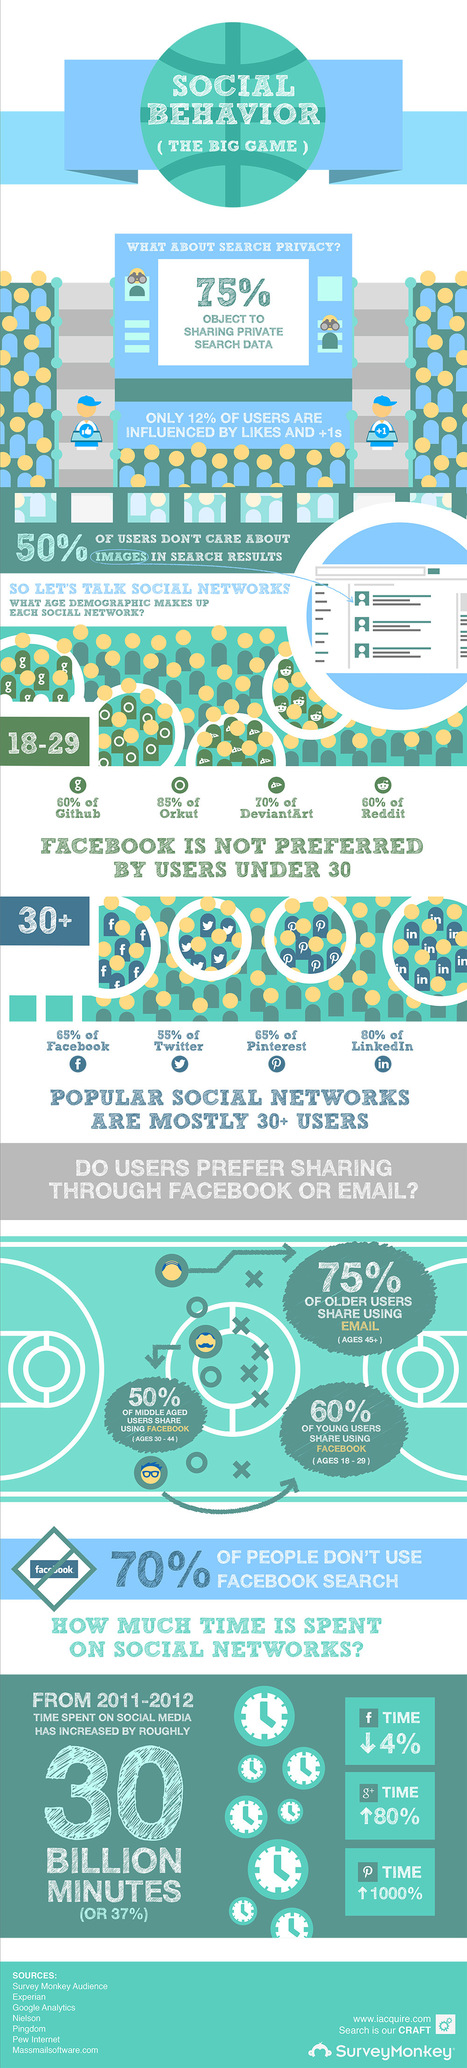 How Are We Using Social Media? [INFOGRAPHIC] | Digital Collaboration and the 21st C. | Scoop.it